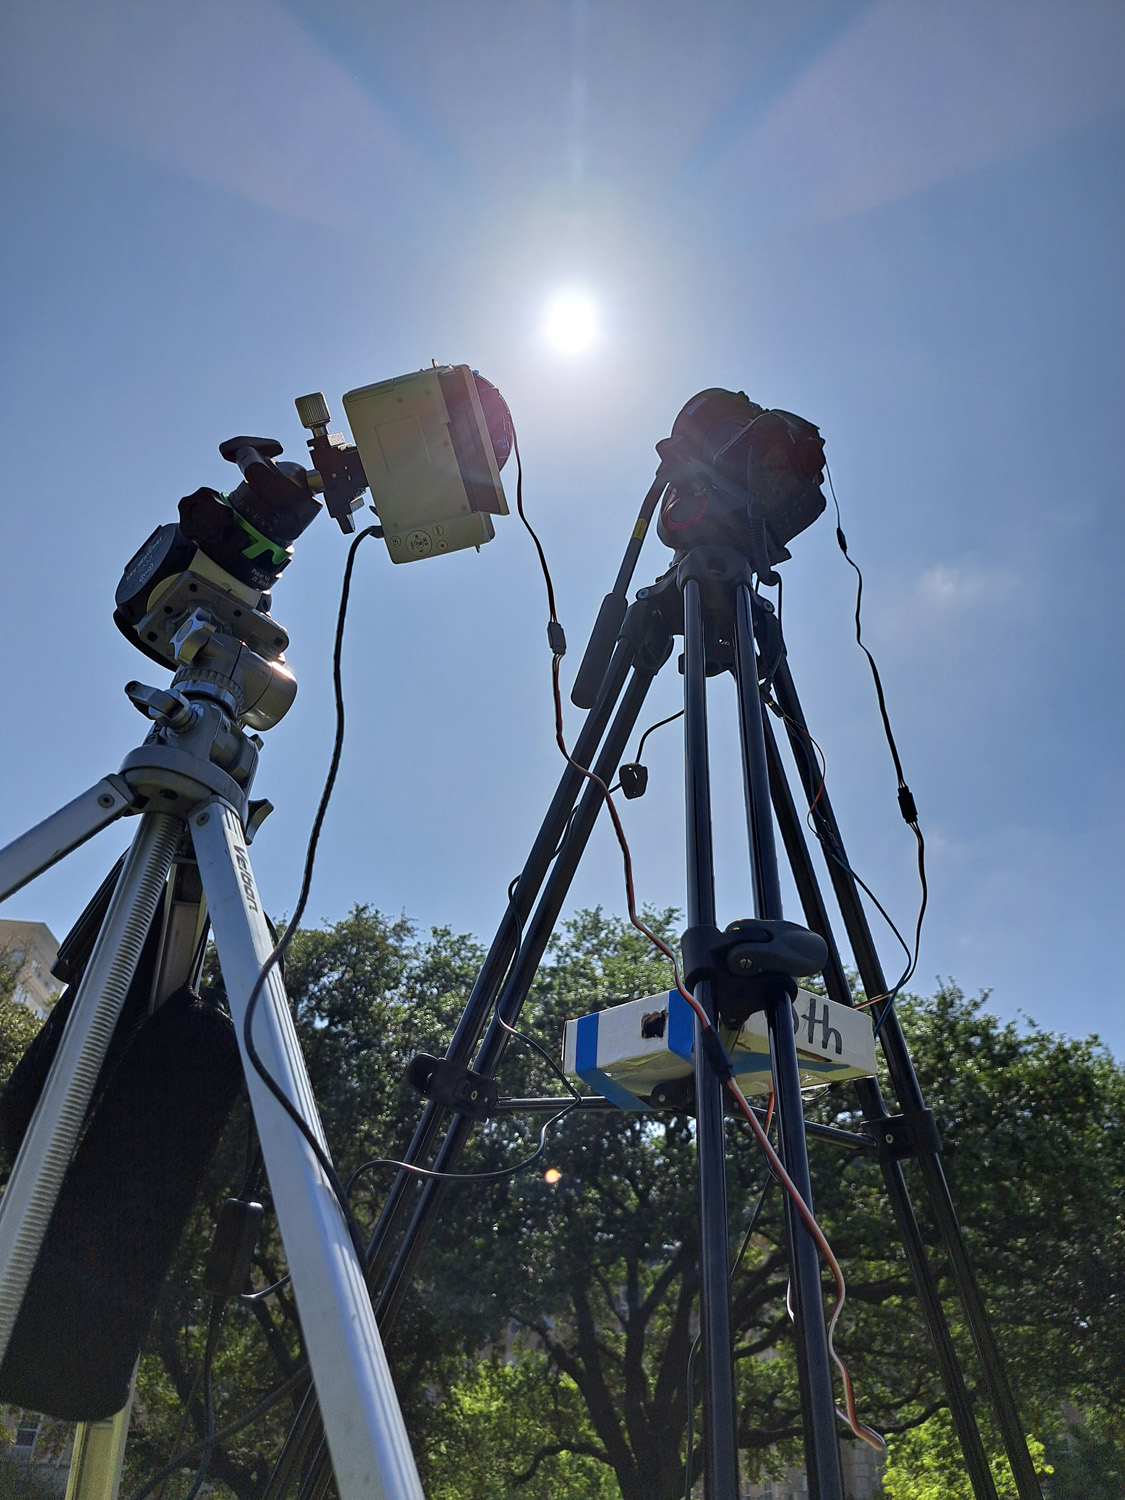 Two tripods and cameras pointed towards the sun against clear blue skies.